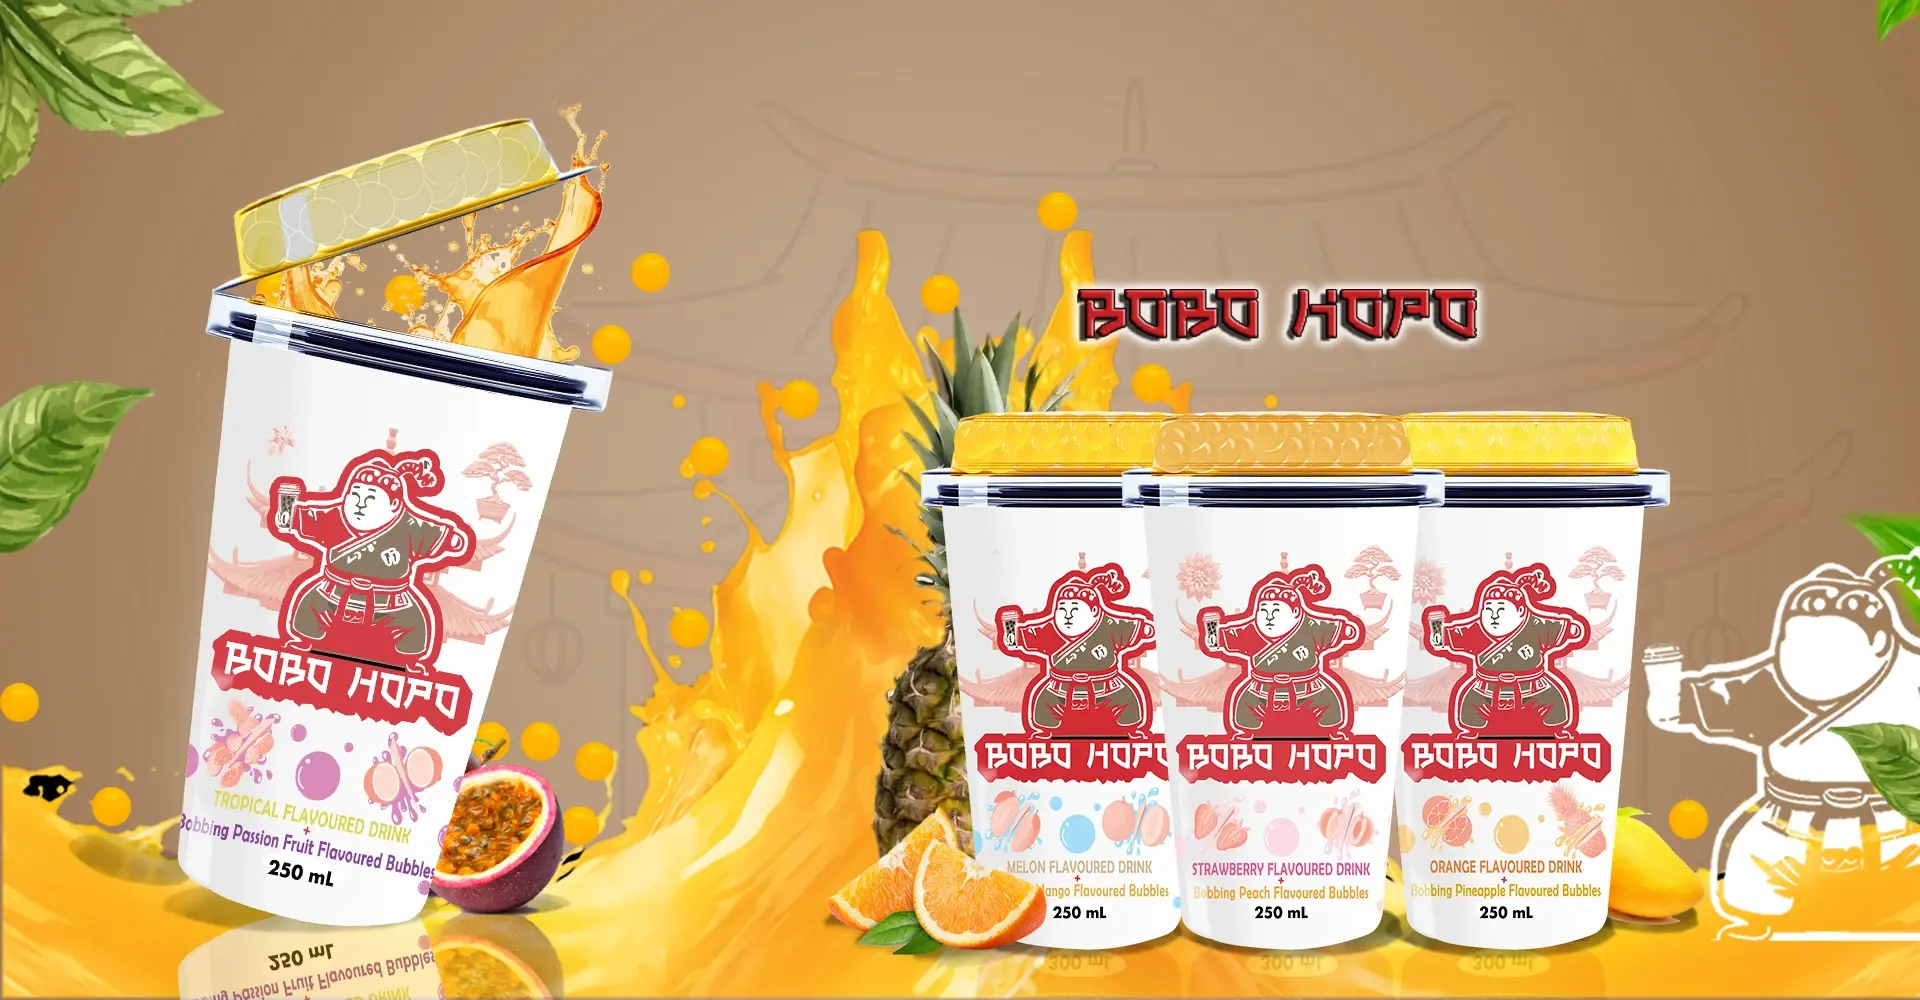 Dynamic advertisement for Bobo Hopo bubble drinks featuring animated characters and fruit splashes, emphasizing exotic flavors.